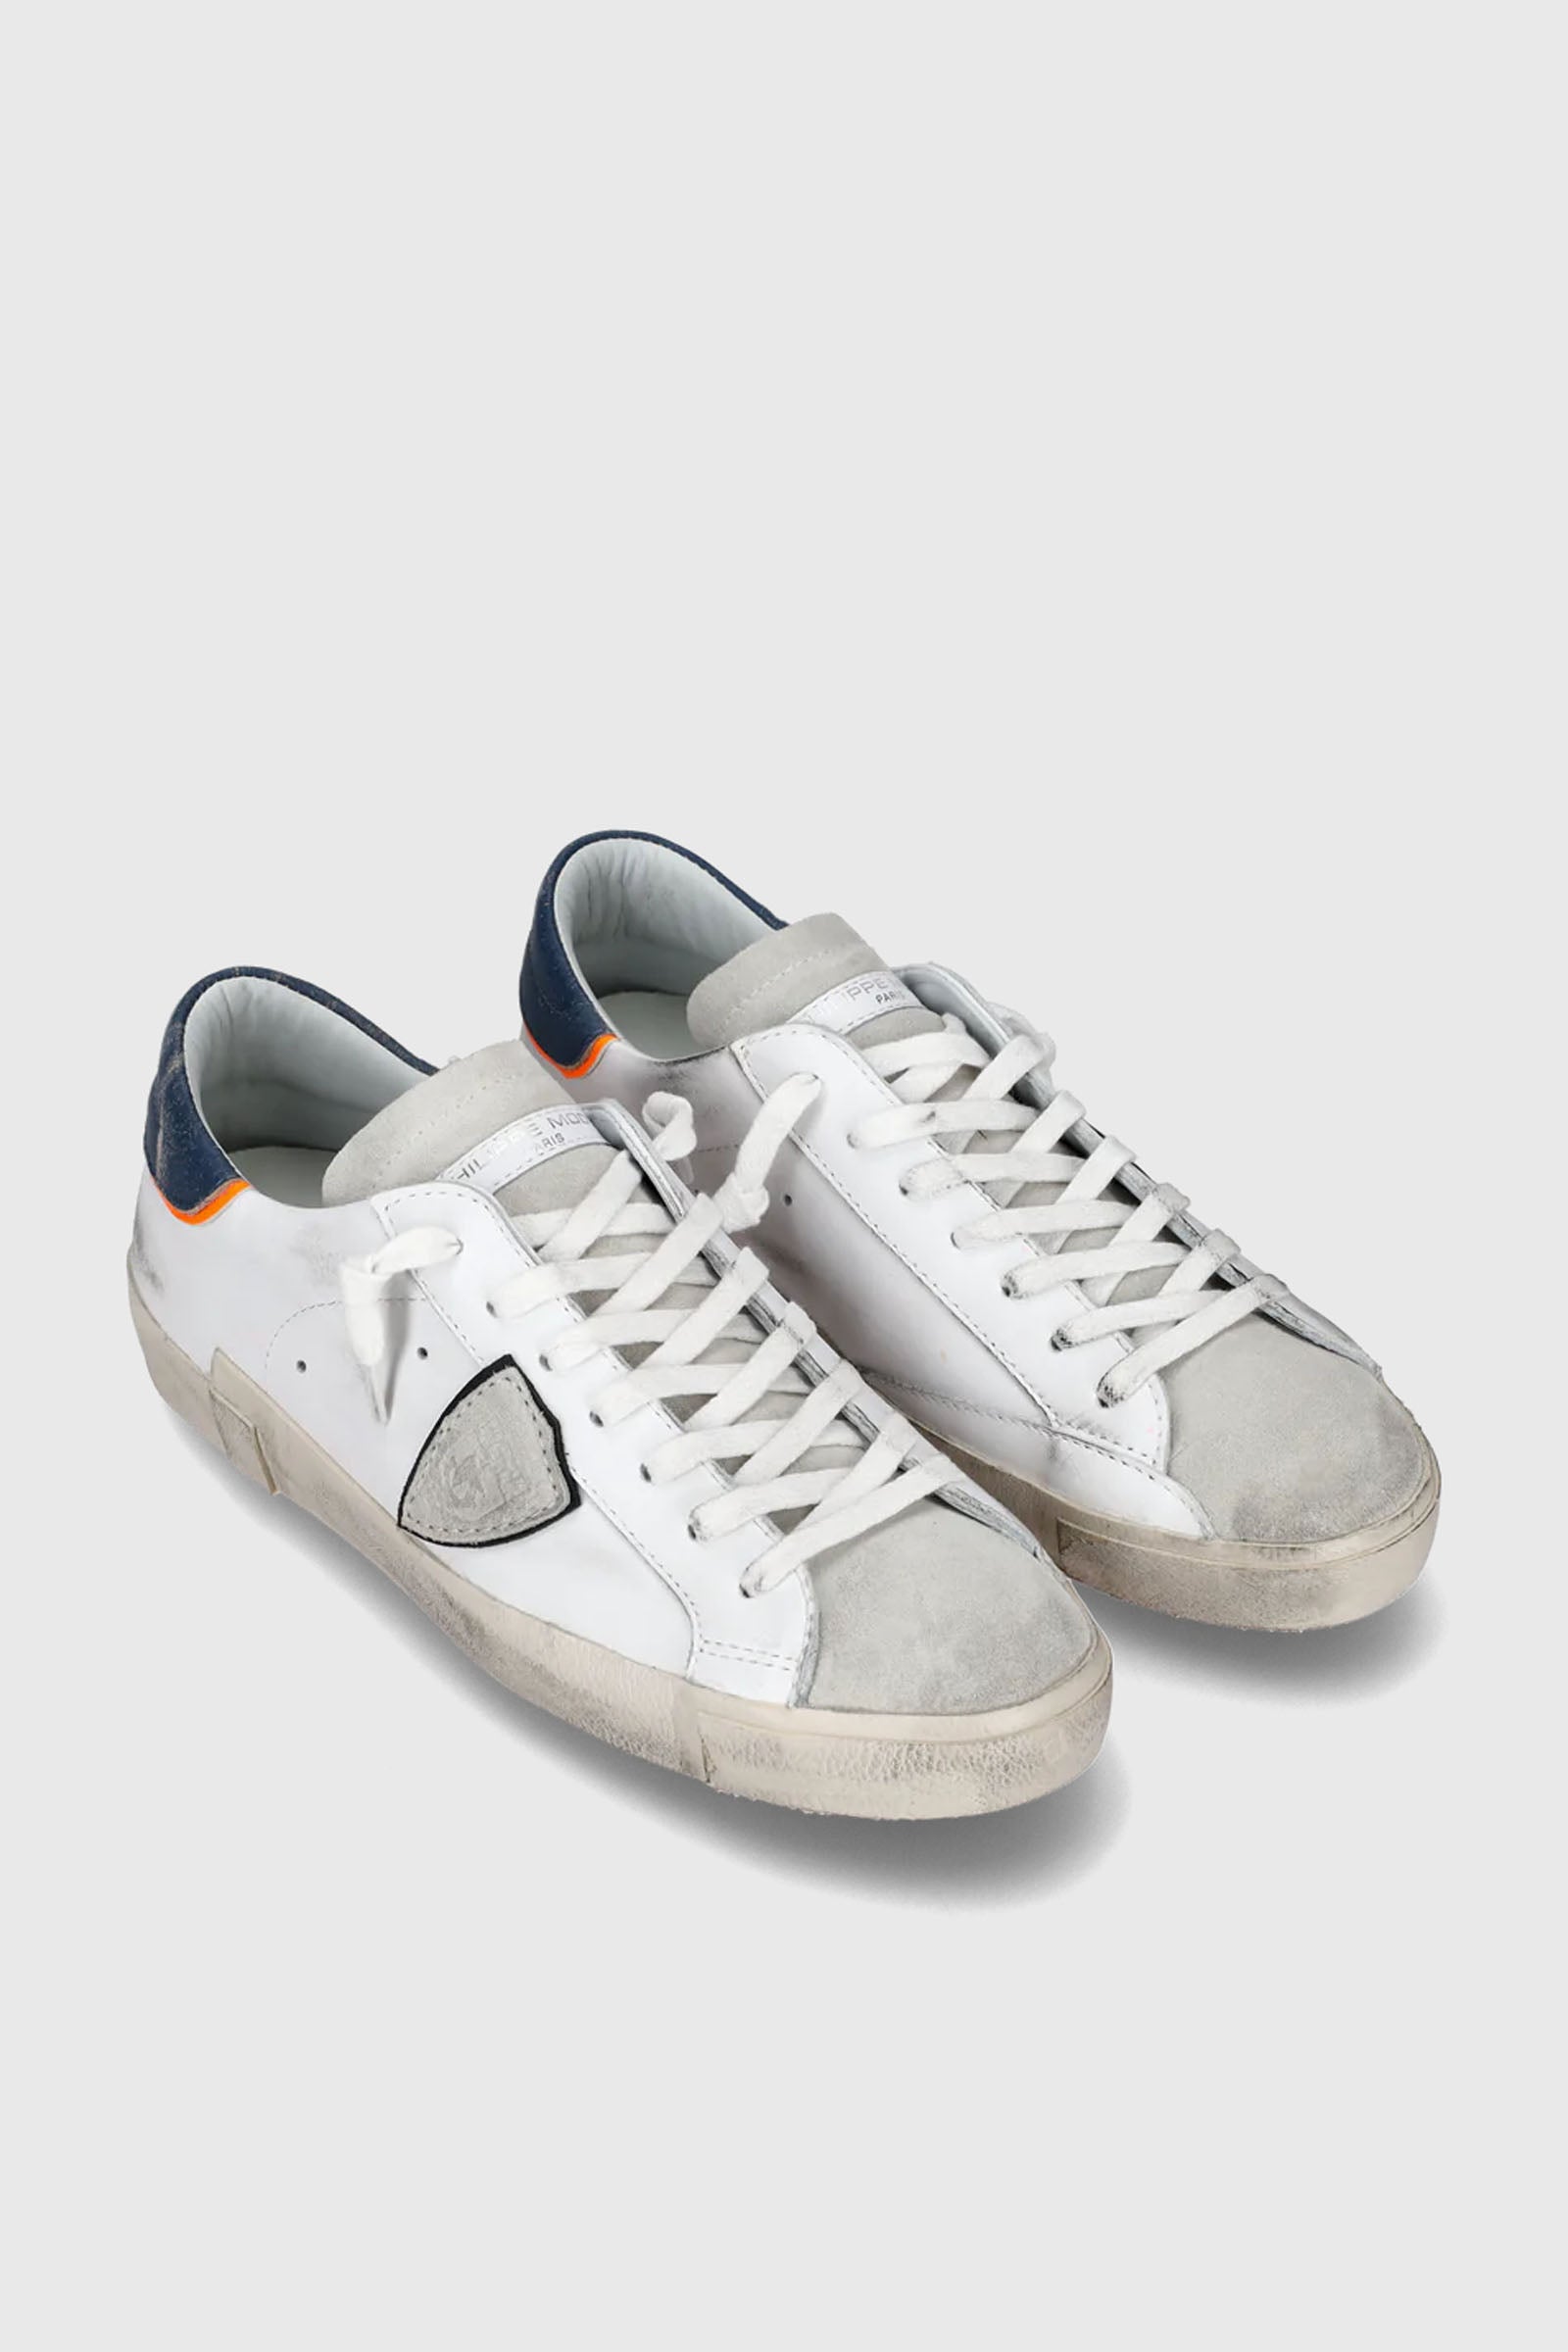 Philippe Model PRSX Vintage Veal Leather Sneakers White/Blue - 2